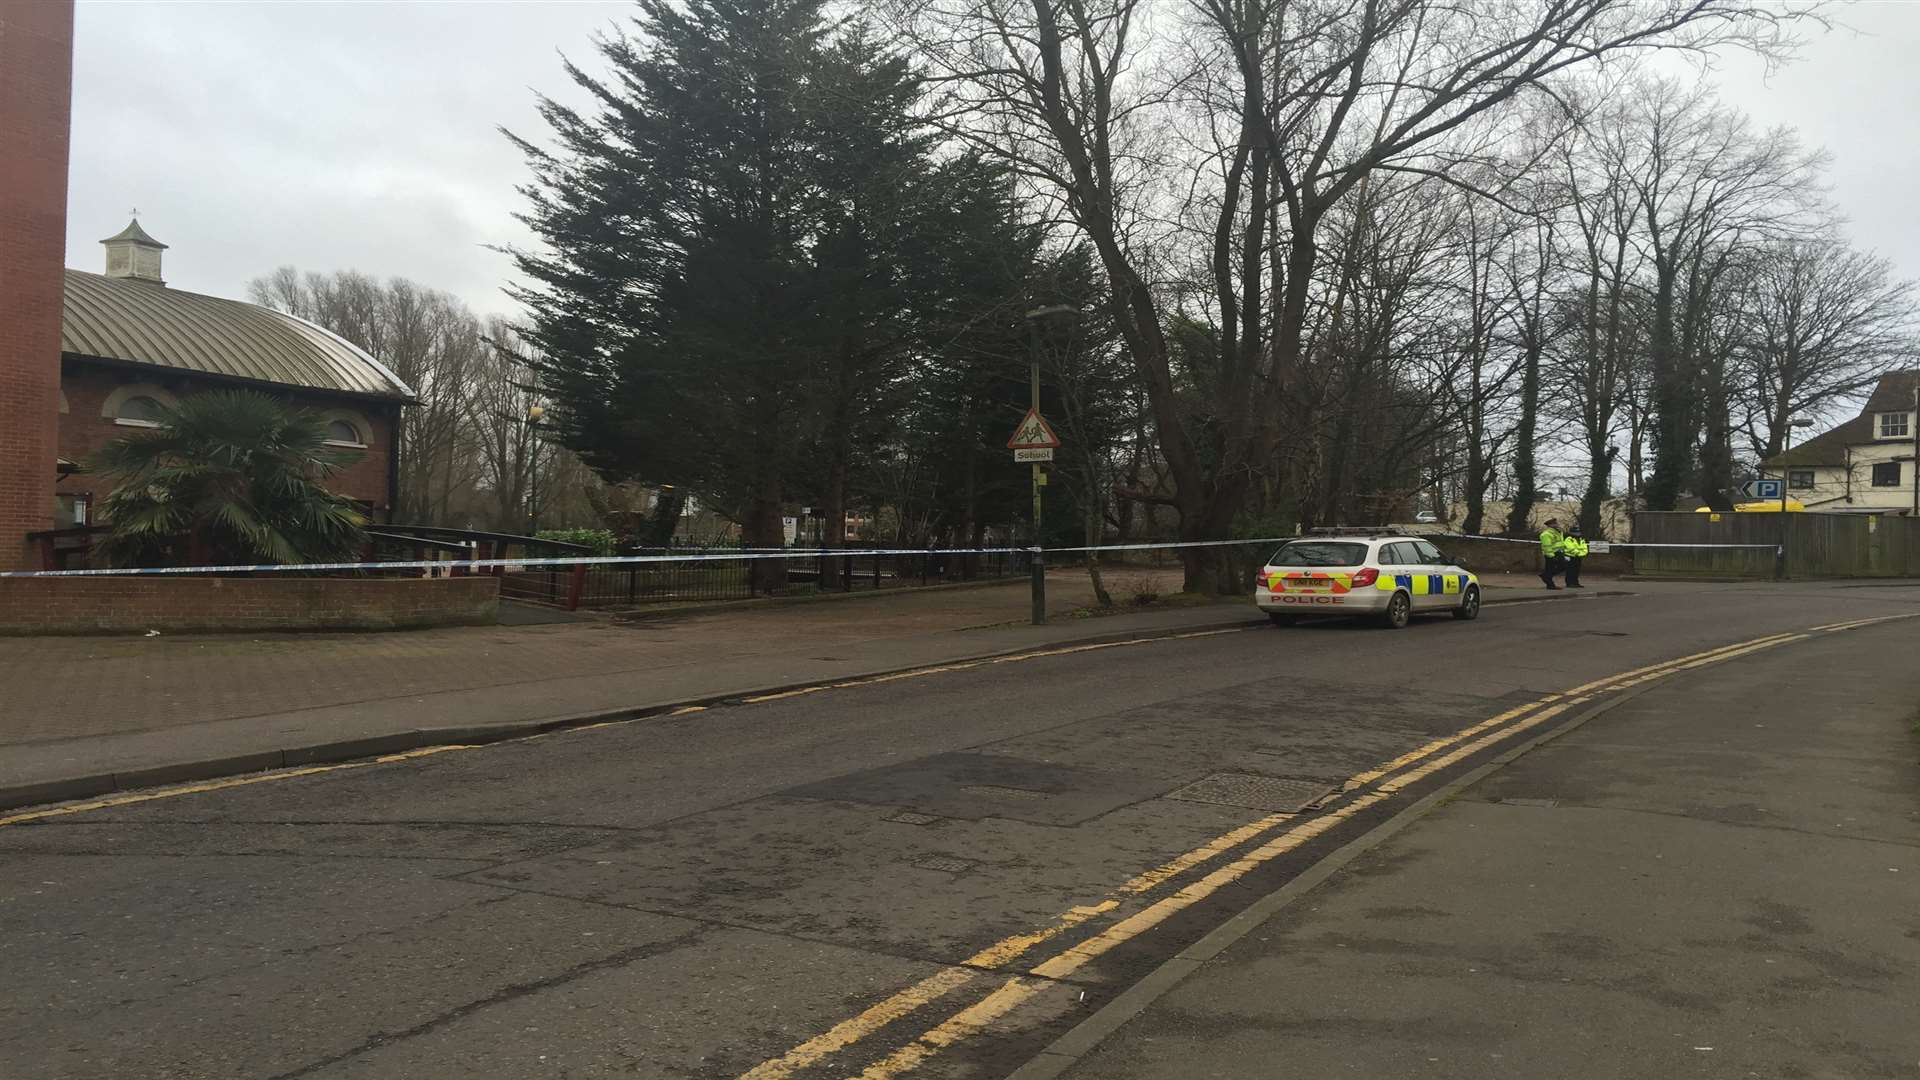 East Hill, Ashford: The area by the former Liquid and Envy nightclub, cordoned off hours after the body of a 50 year-old man was recovered from the river